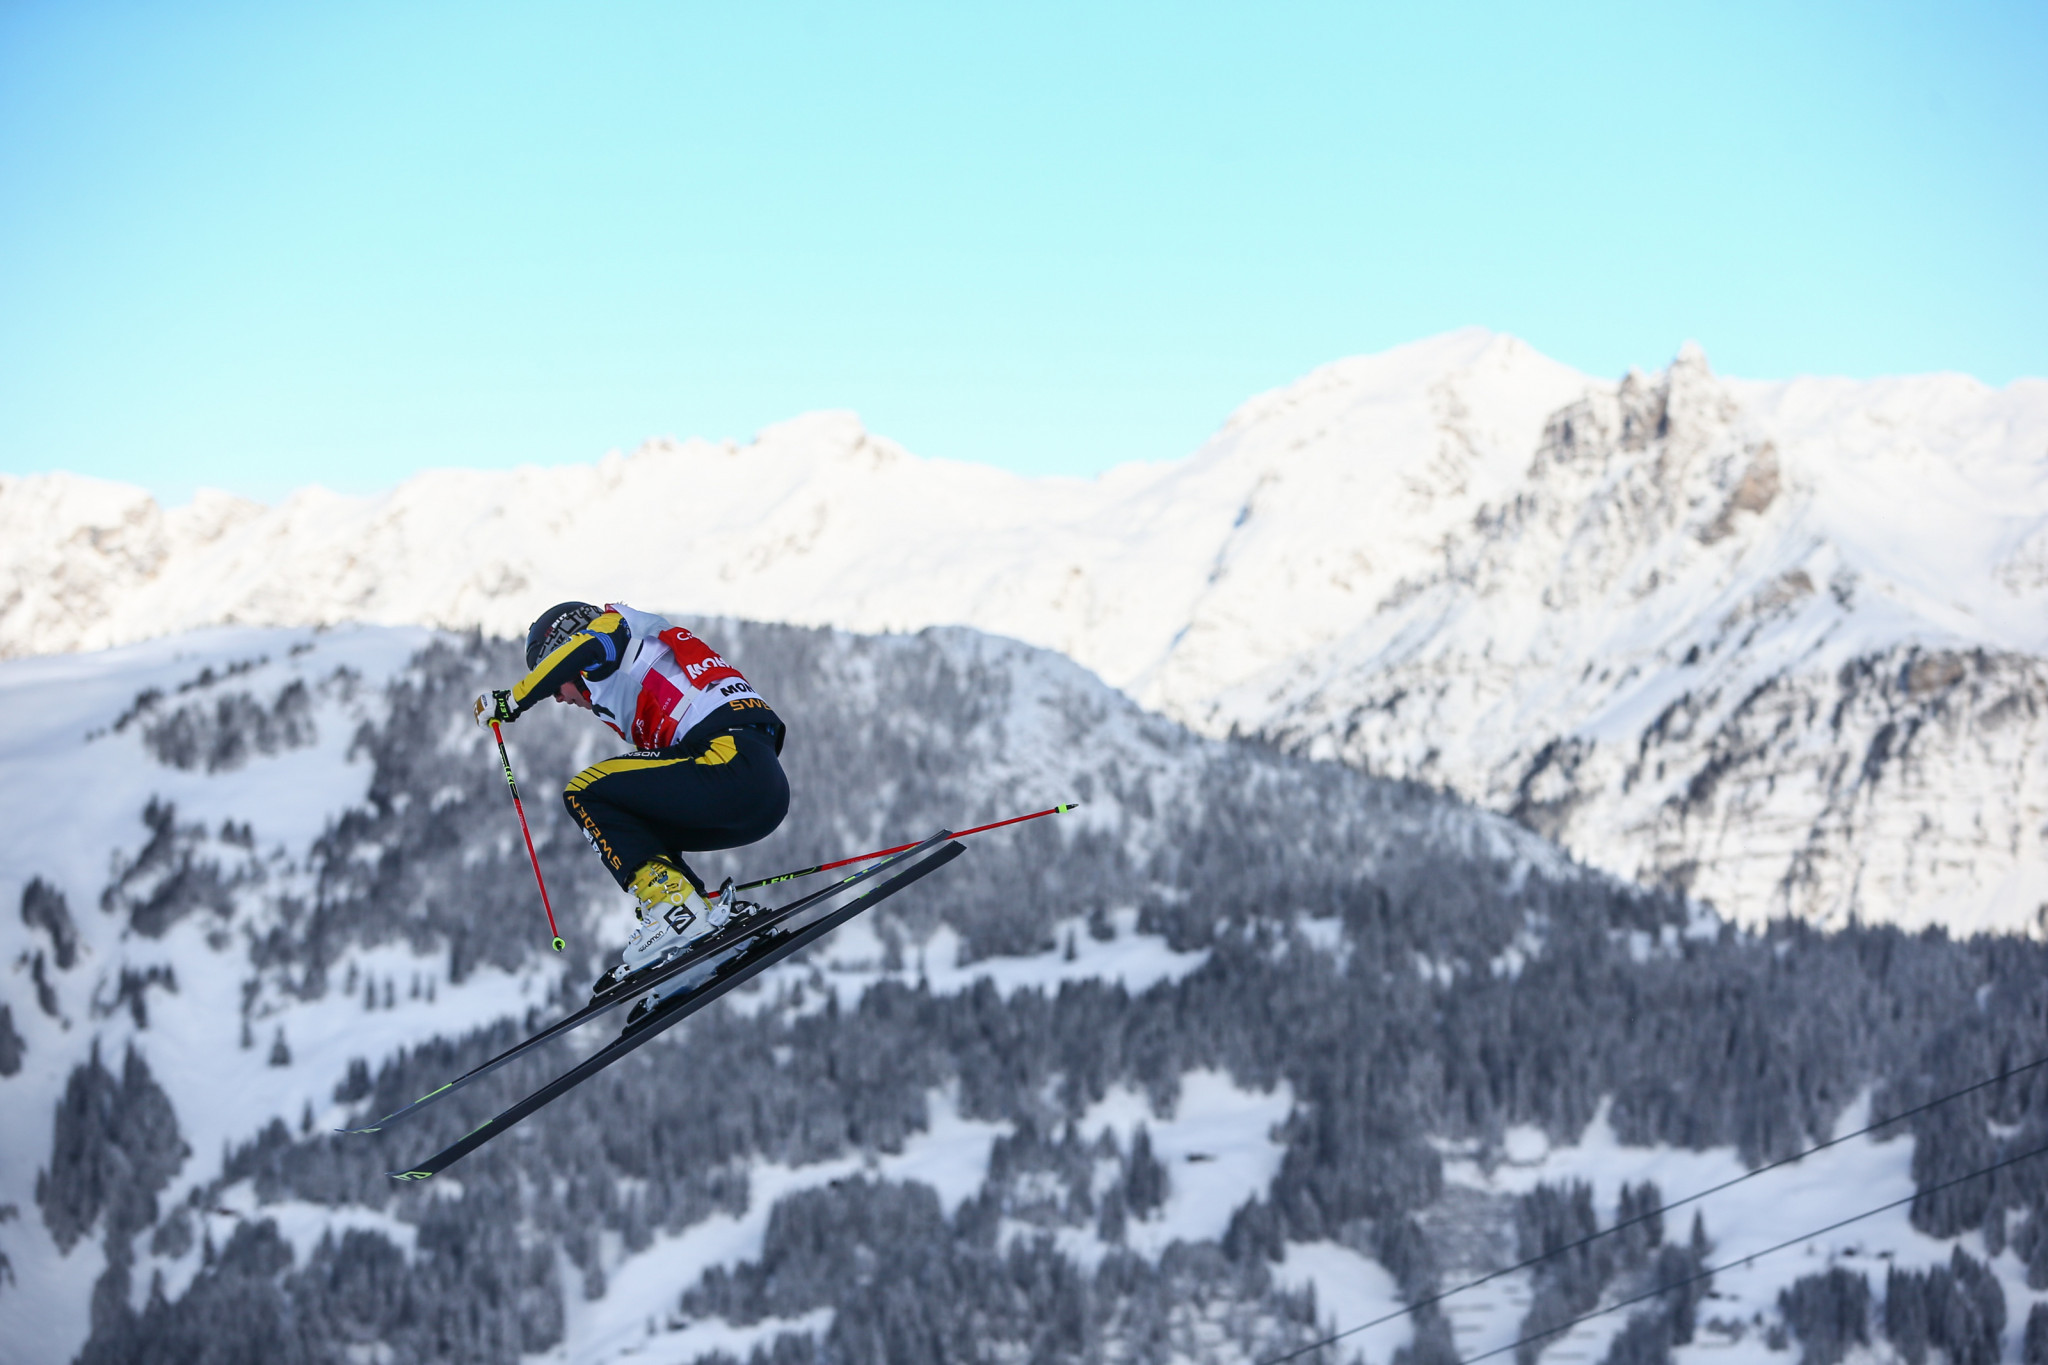 Naeslund to challenge for third FIS Ski Cross World Cup title of the season